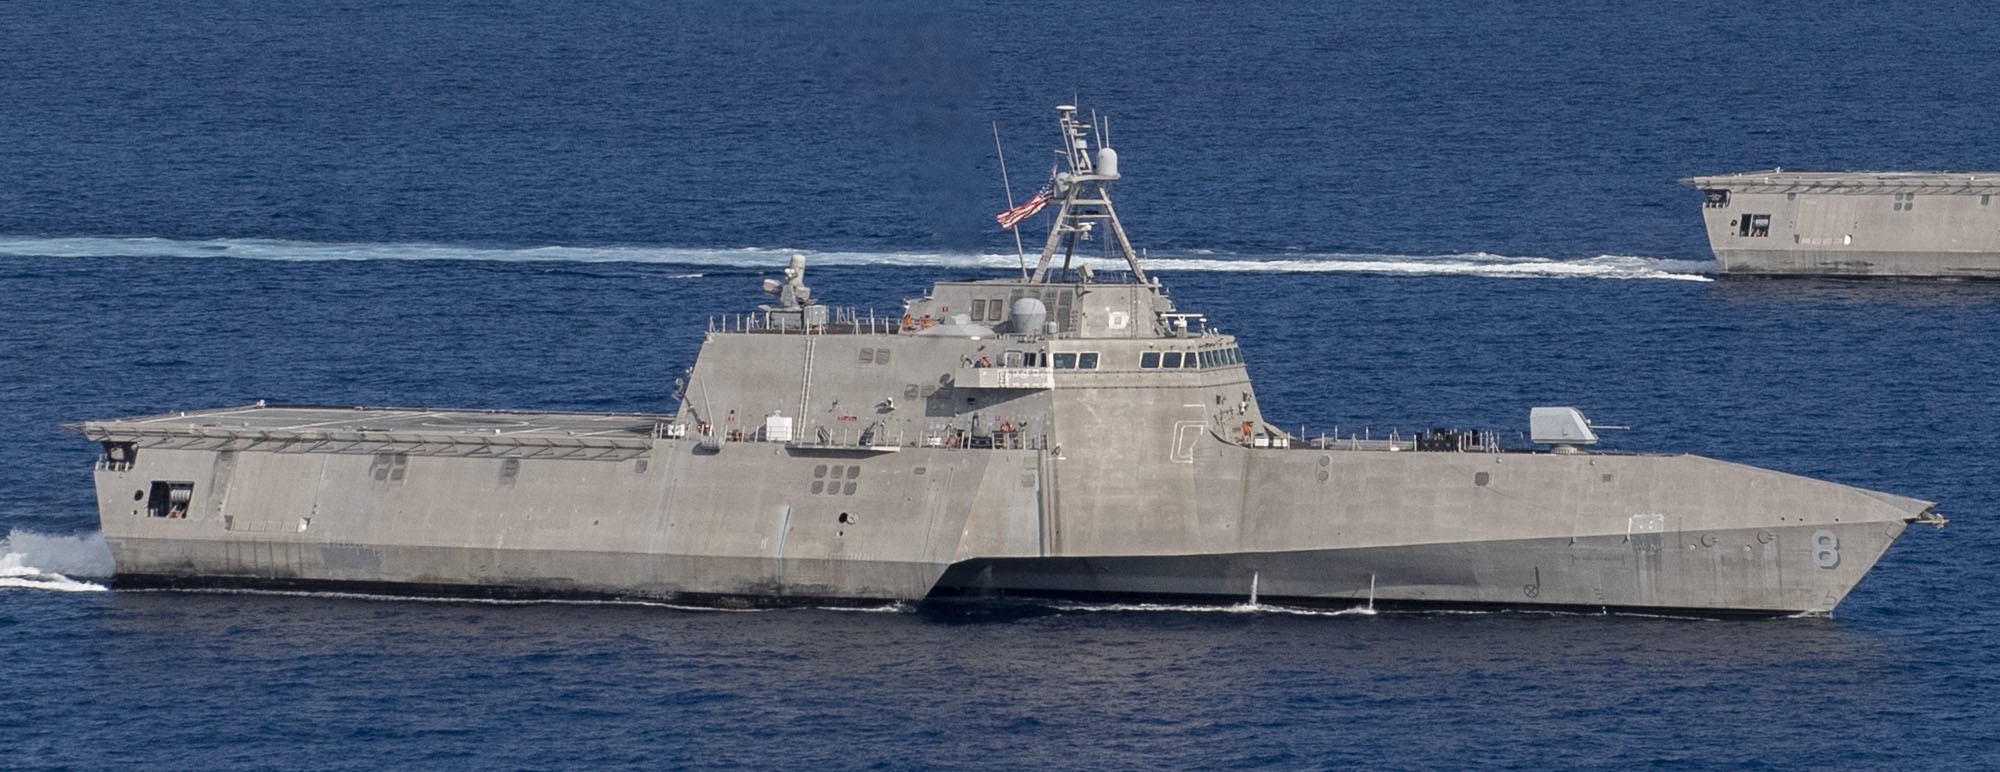 lcs-8 uss montgomery independence class littoral combat ship us navy 18